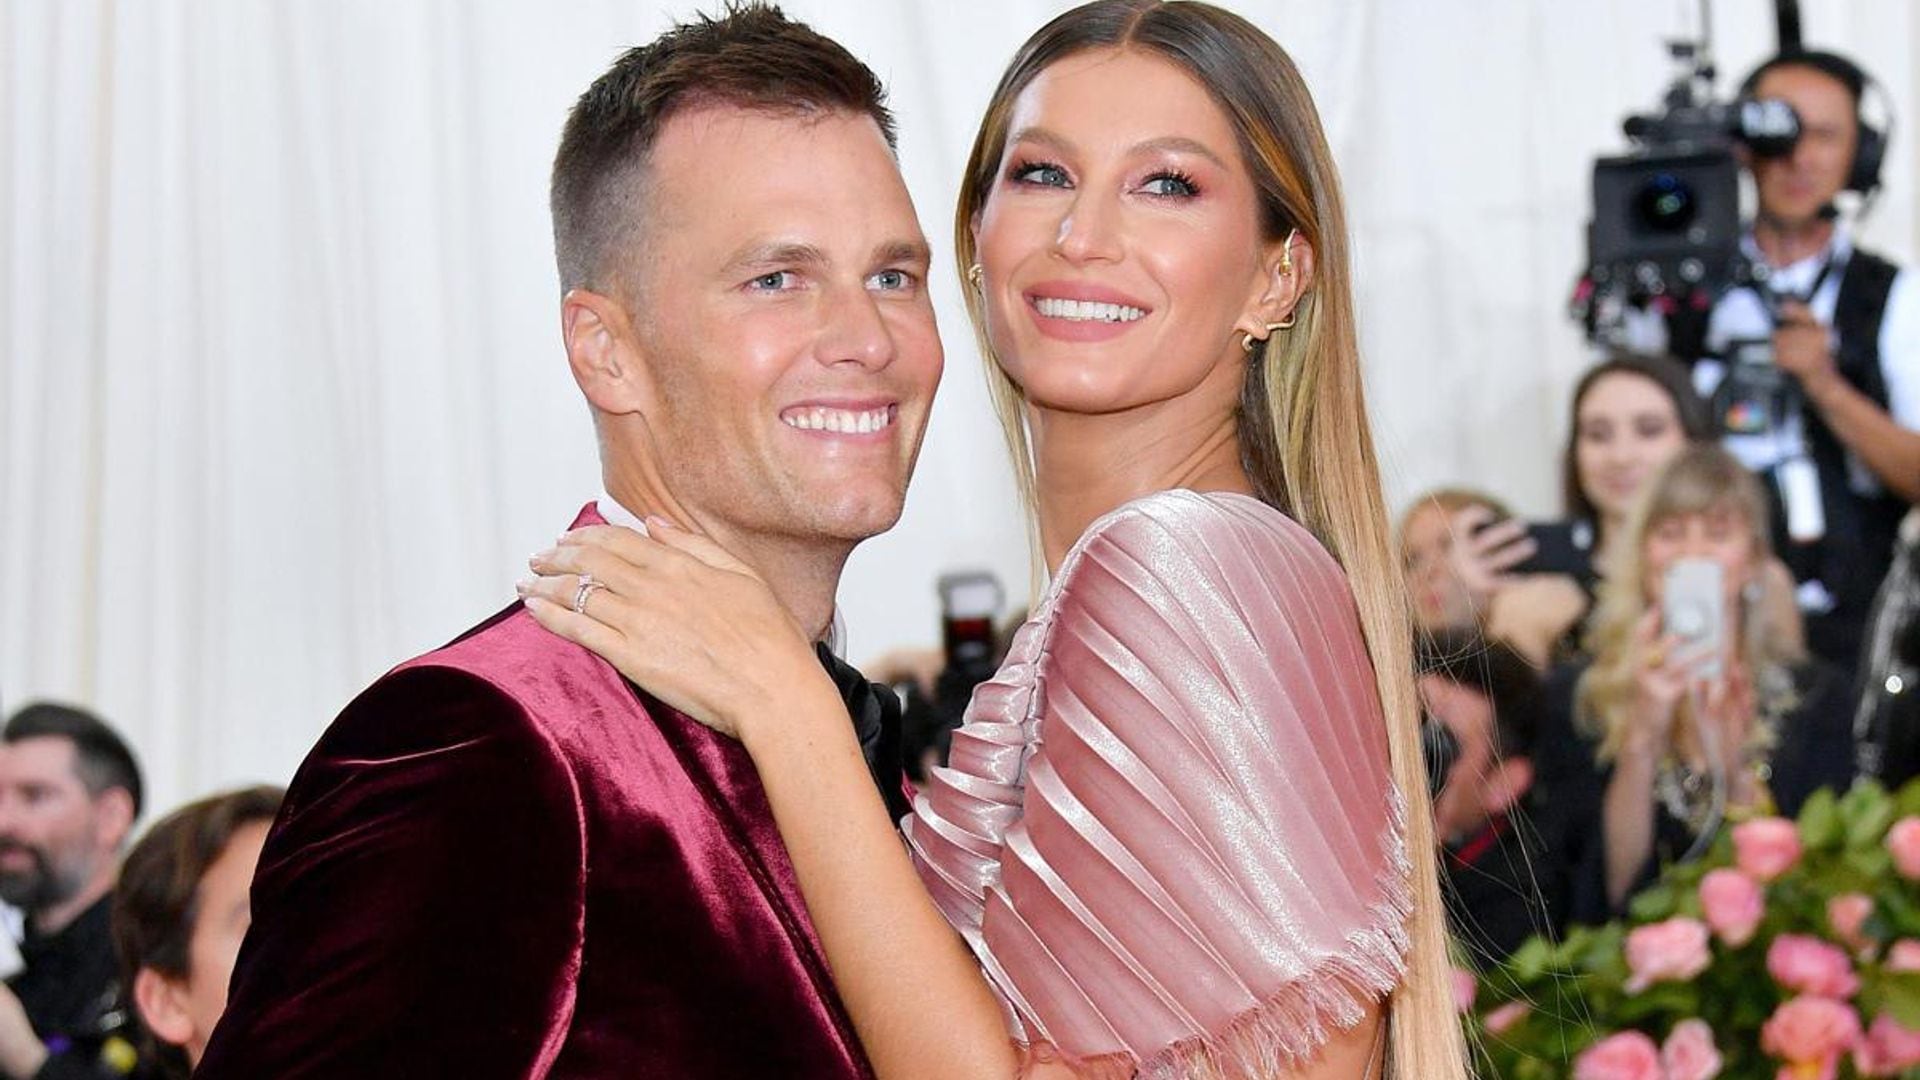 Gisele Bündchen is releasing a new cookbook full of the Brady family’s recipes